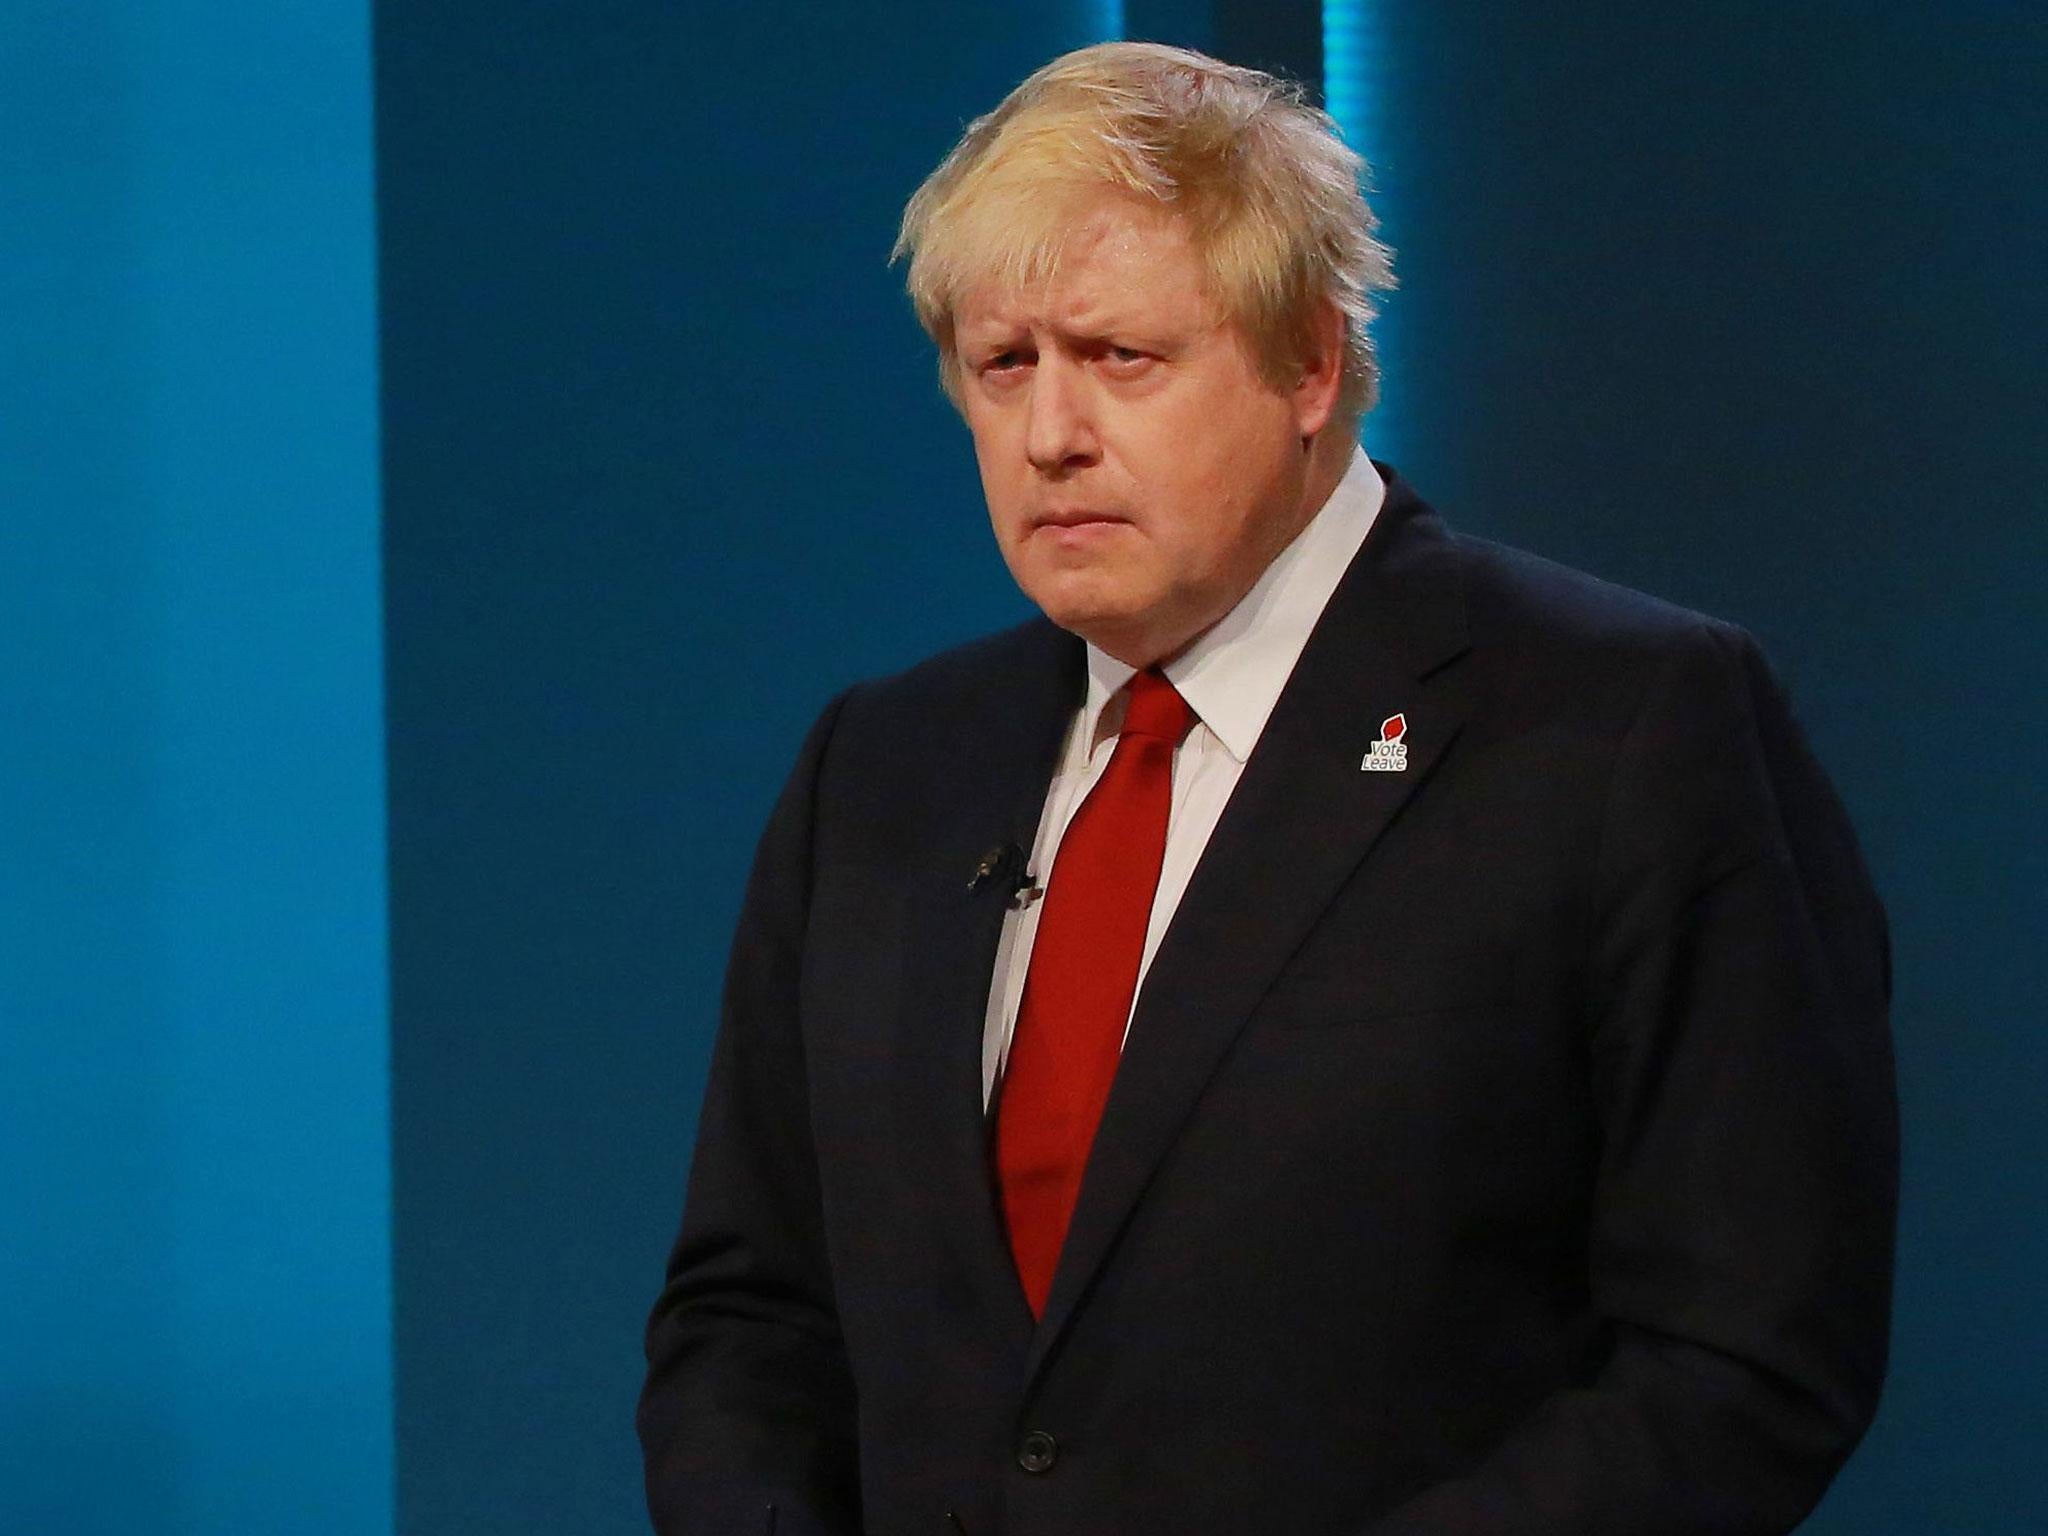 Boris Johnson came under personal fire from the Remain camp during the debate